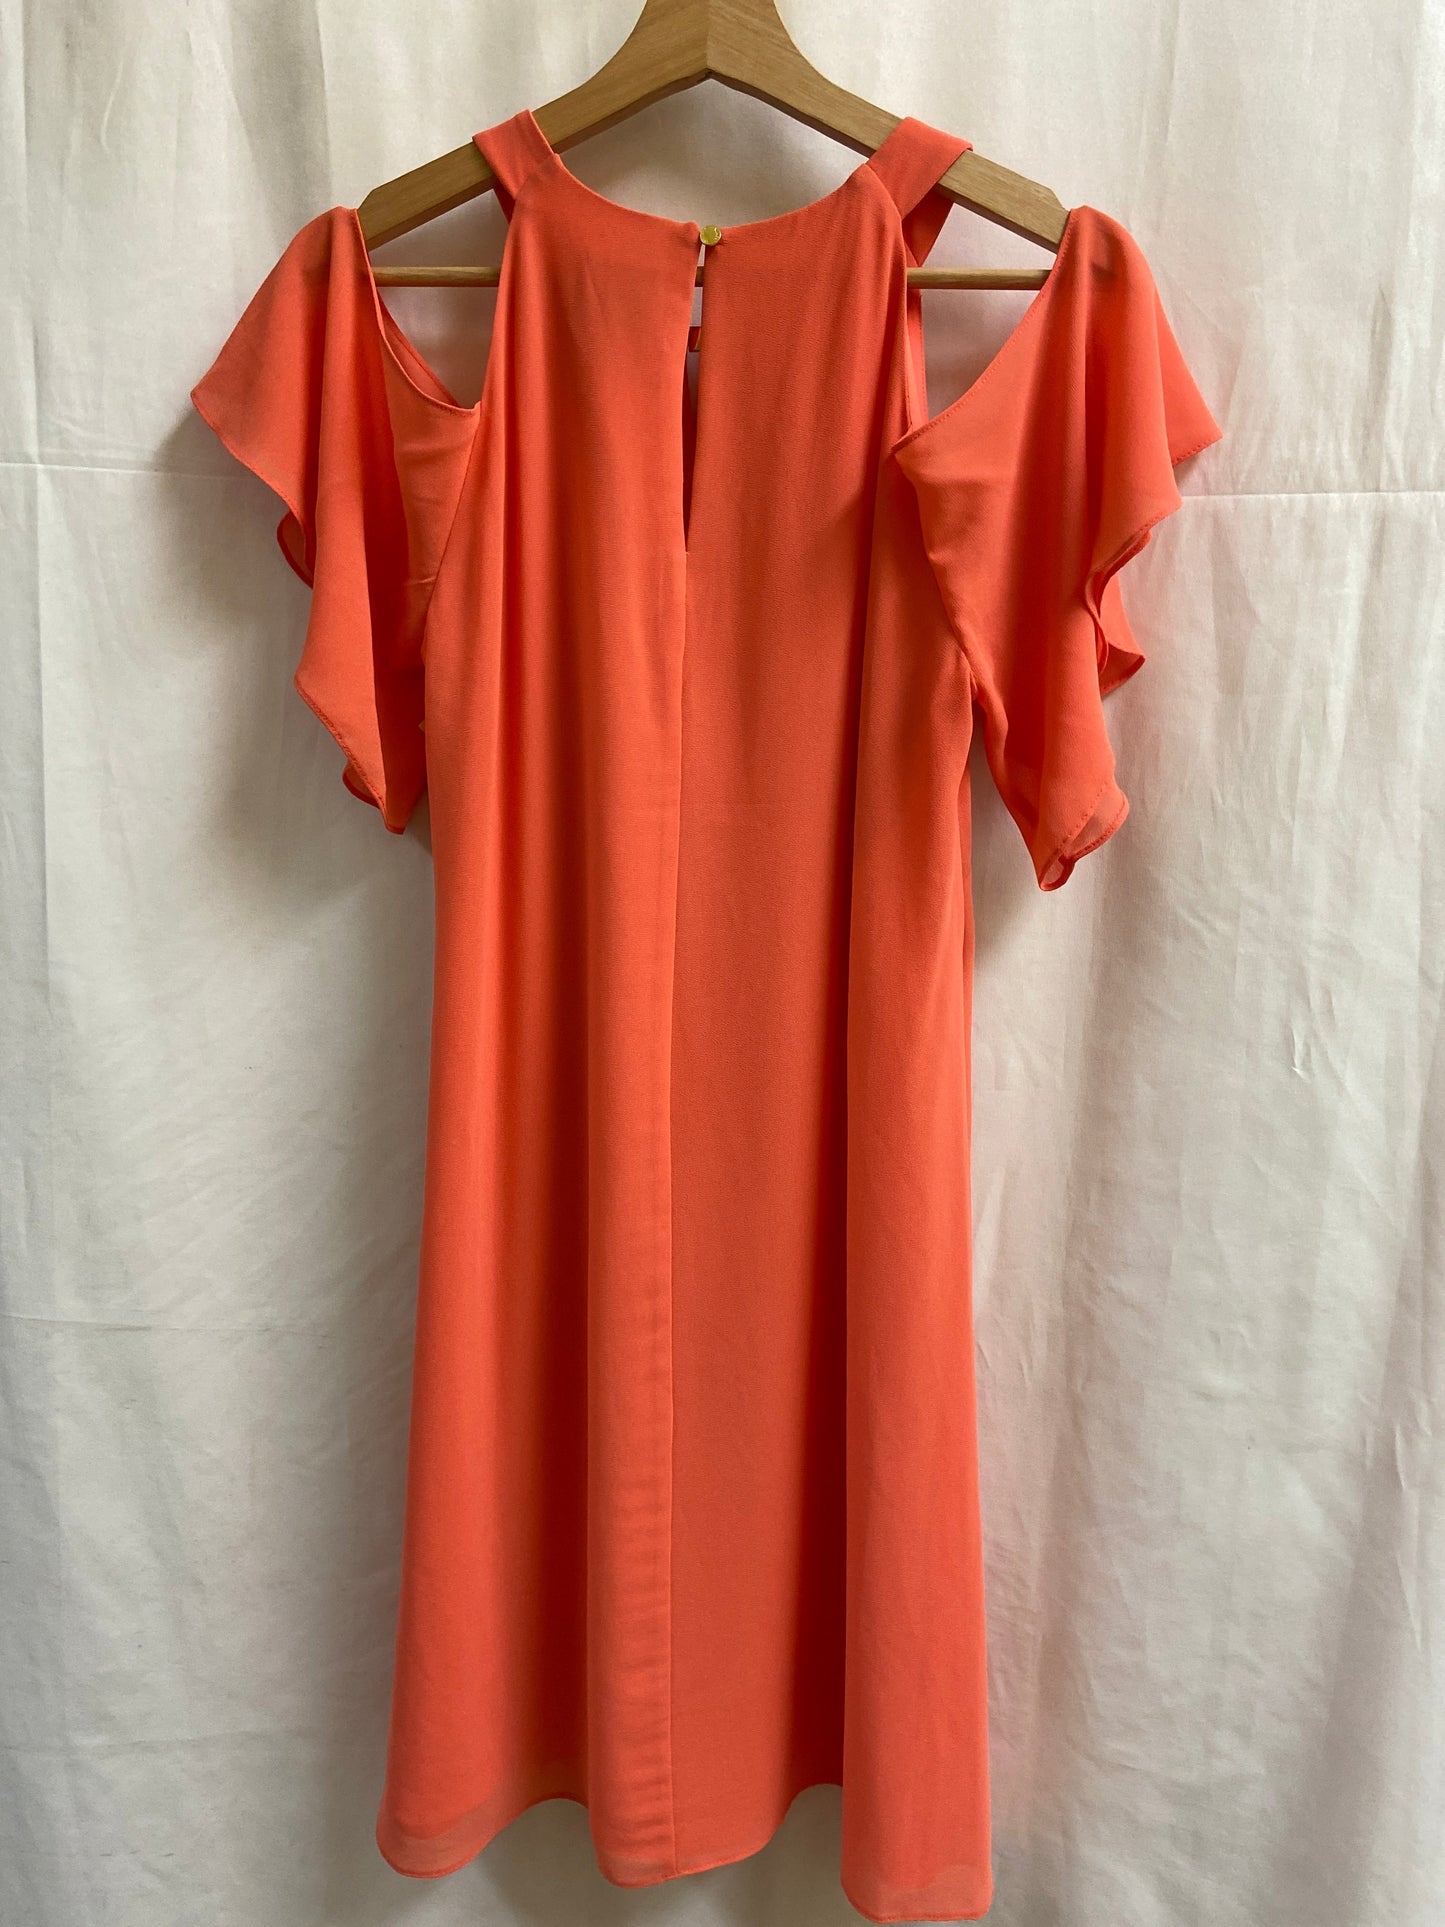 Dress Casual Short By Vince Camuto  Size: Xs